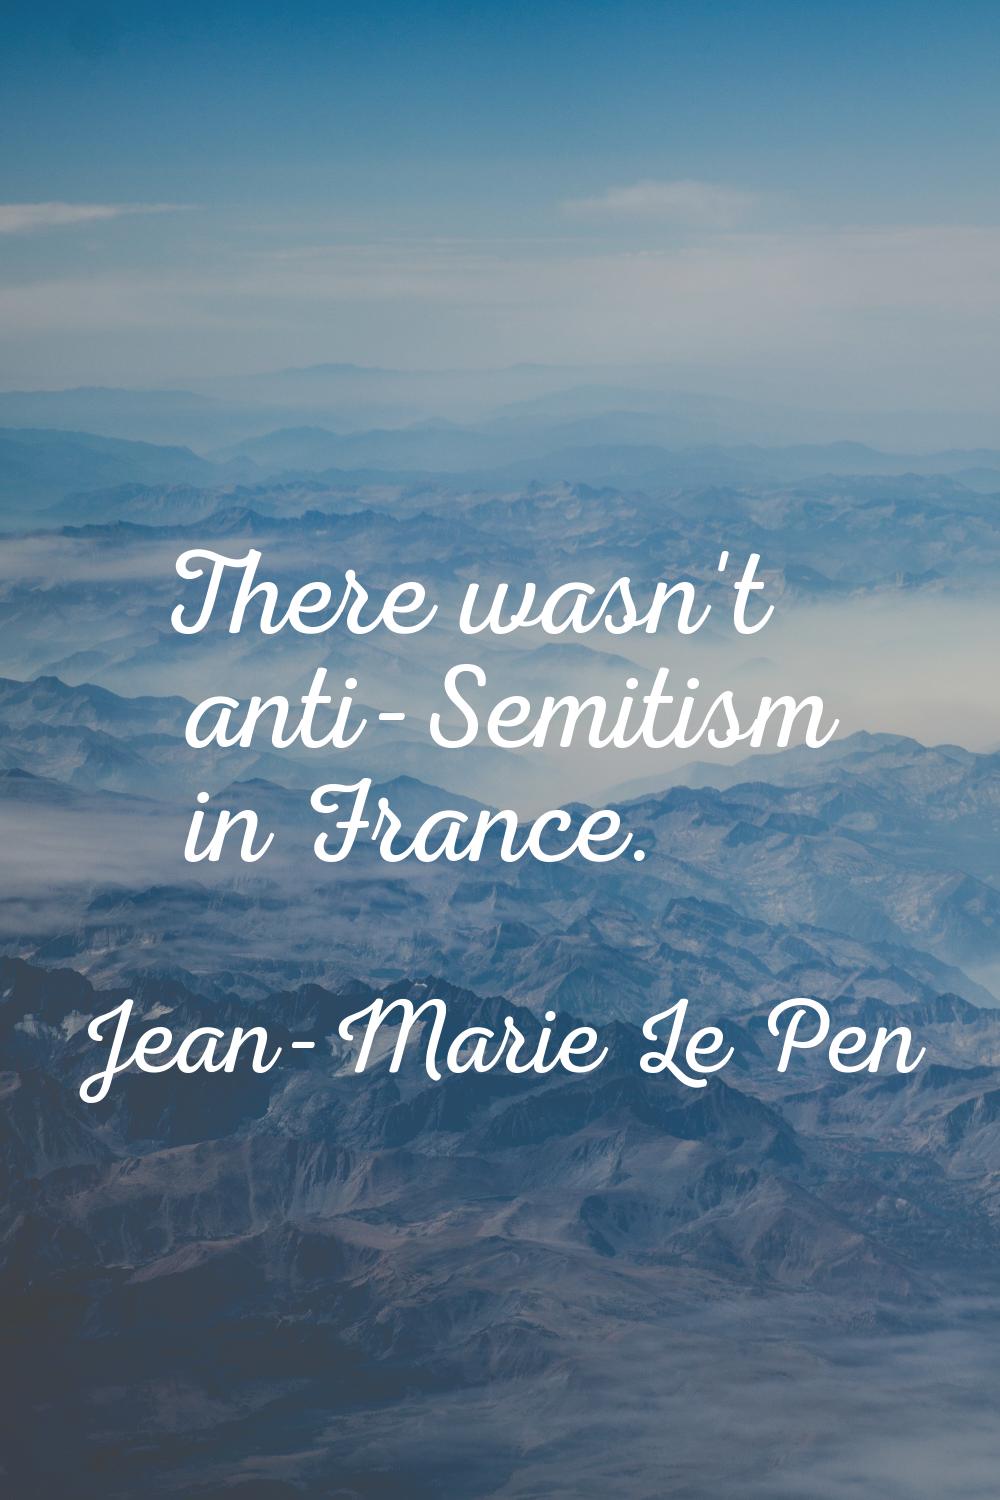 There wasn't anti-Semitism in France.